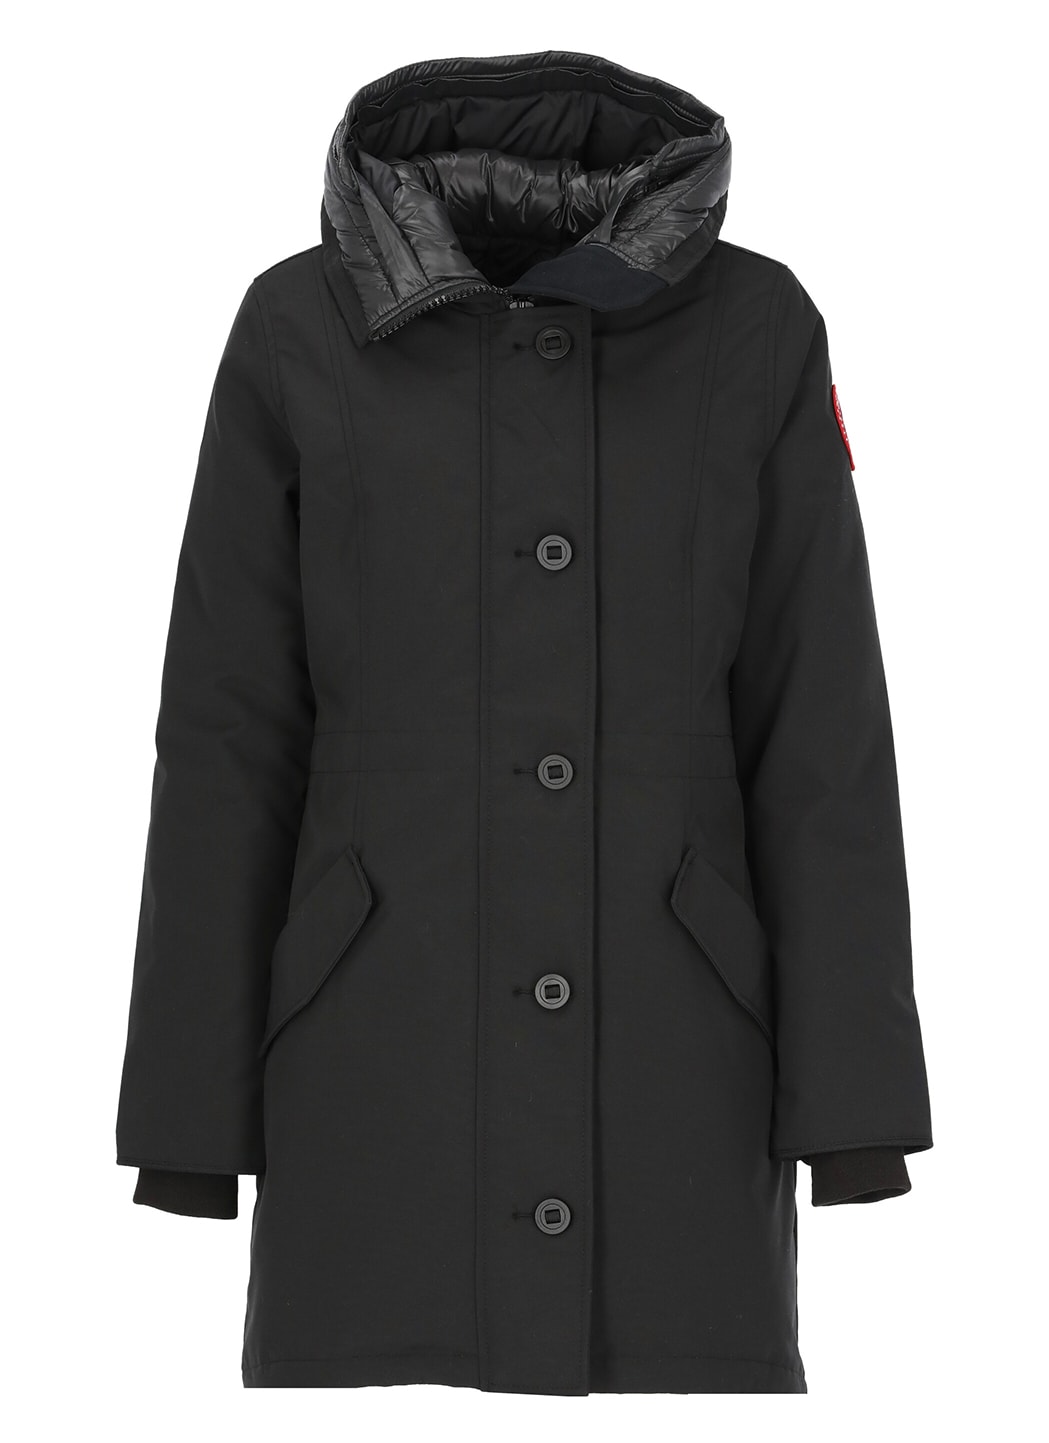 CANADA GOOSE ROSSCLAIR DOWN JACKET